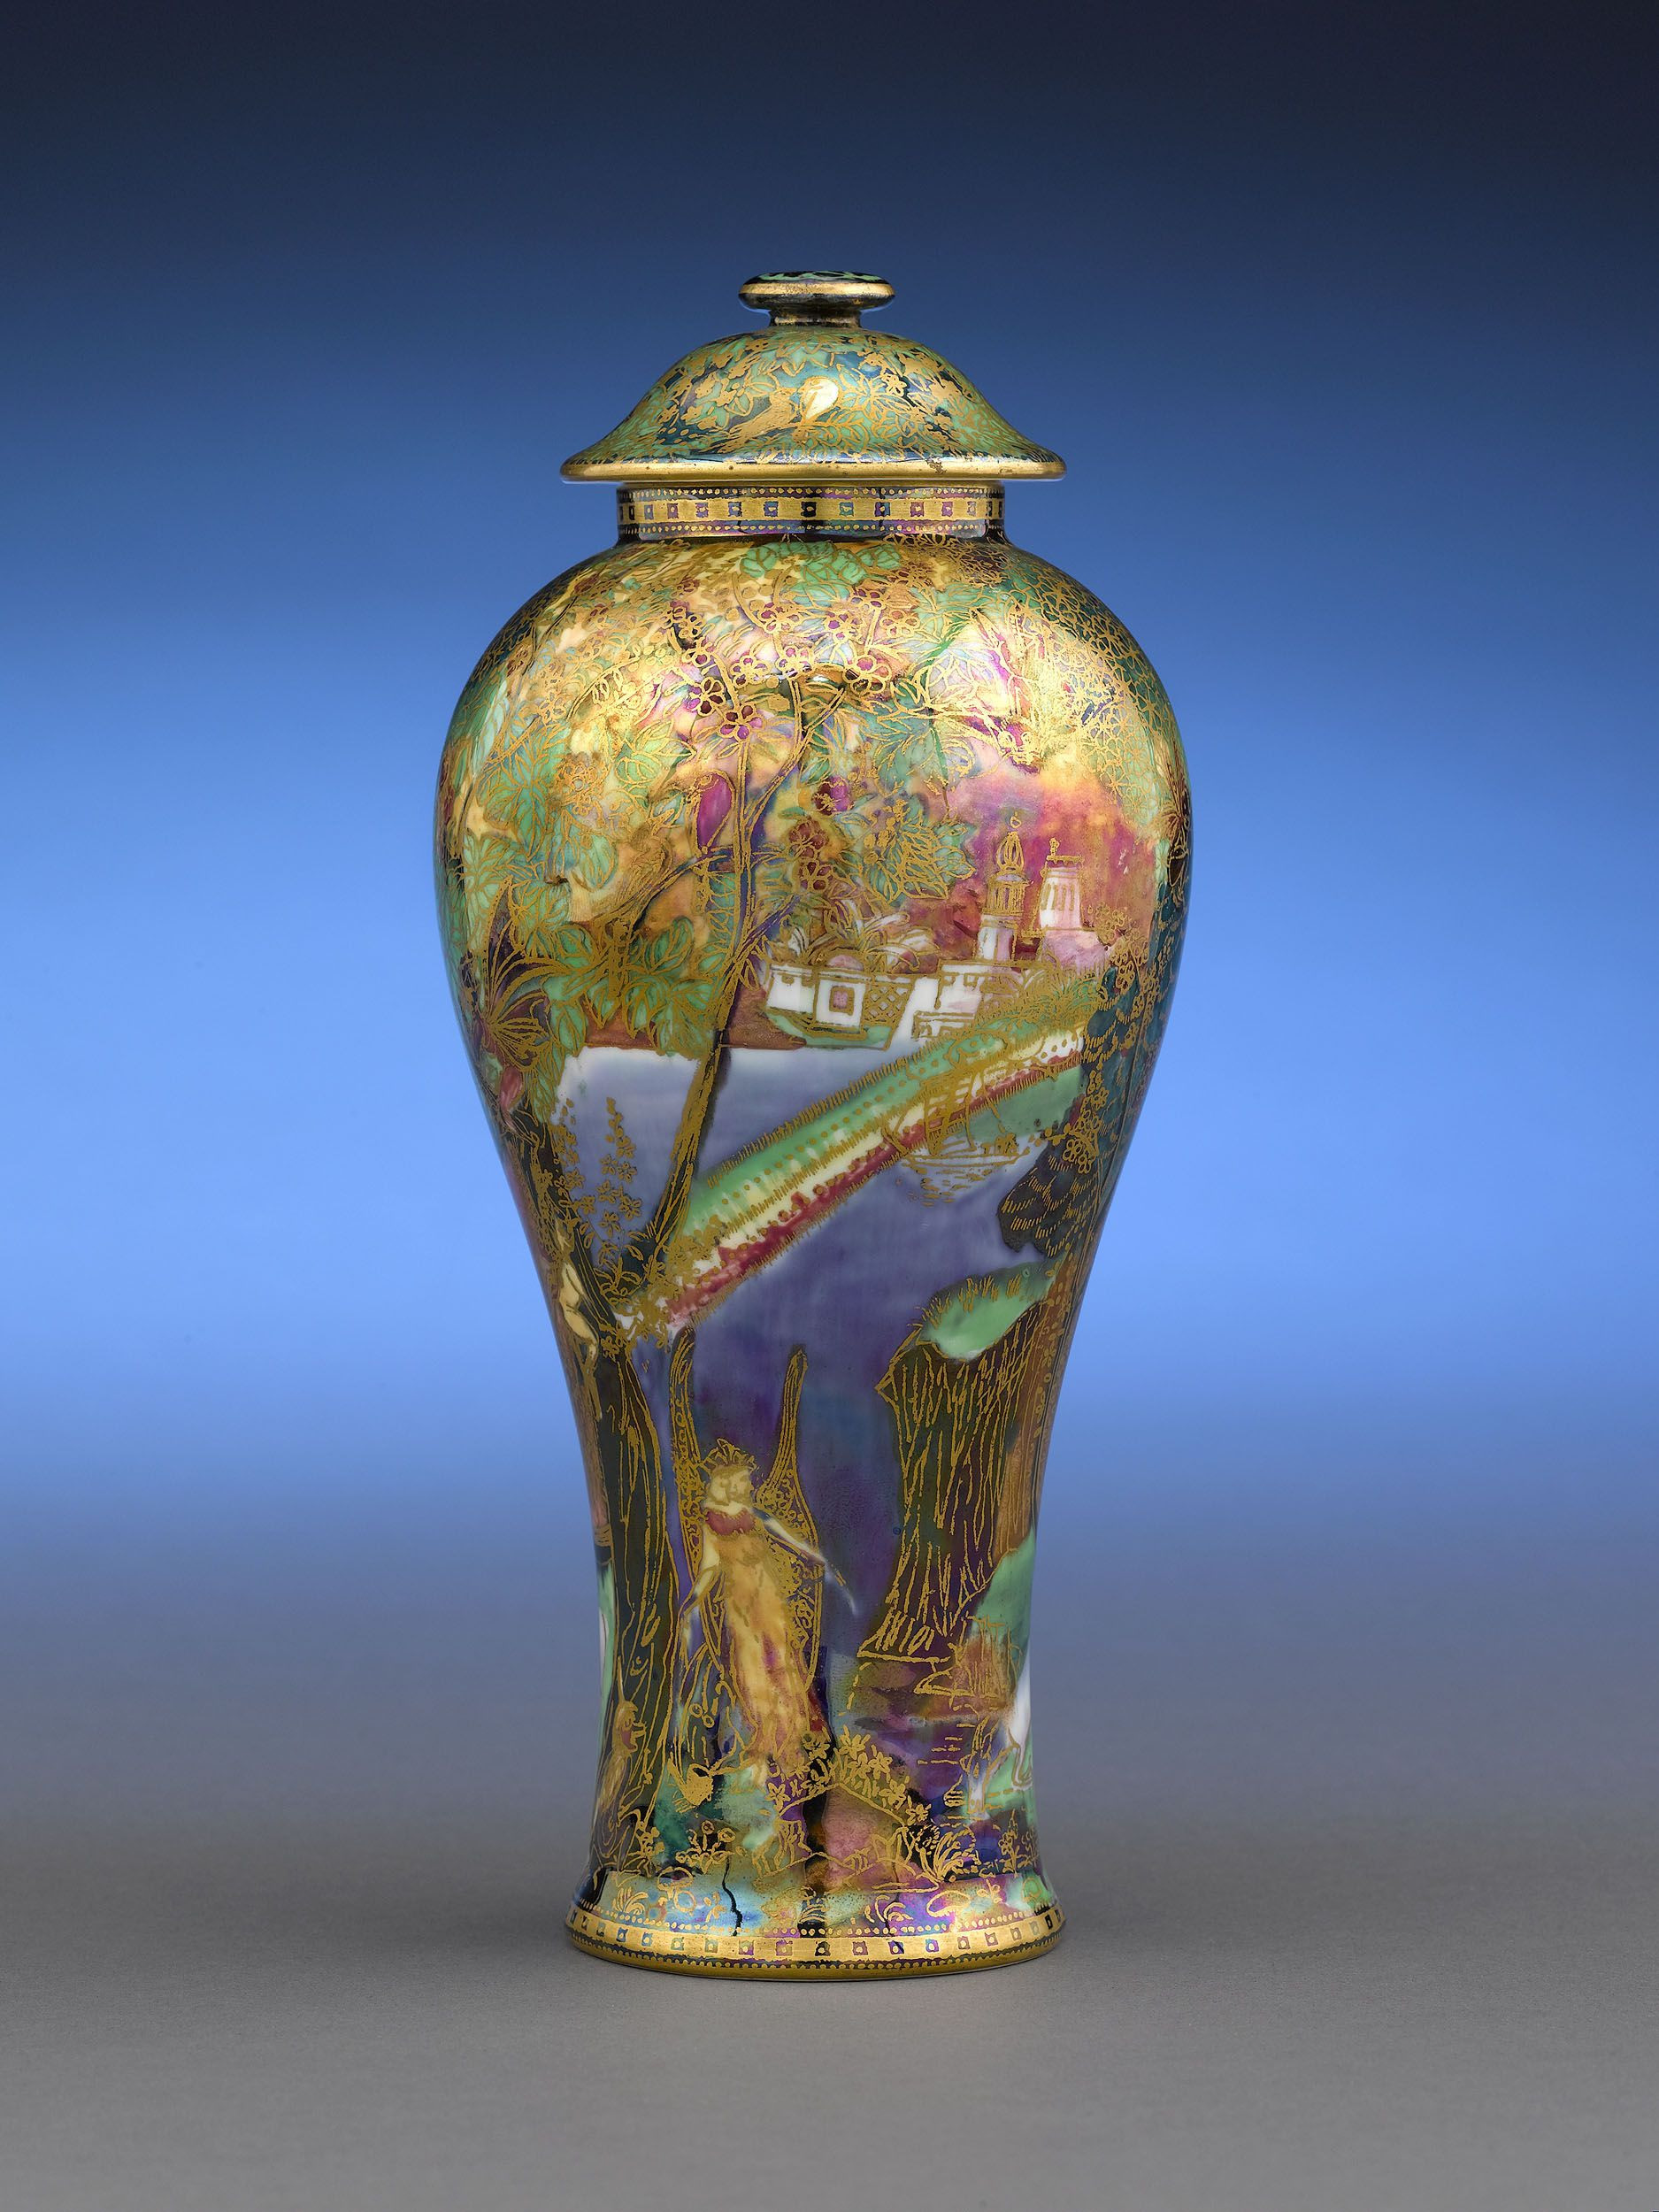 10 Famous Wedgwood Vases for Sale 2024 free download wedgwood vases for sale of wedgwood fairyland lustre wedgwood fairyland lustre rainbow vase regarding wedgwood fairyland lustre wedgwood fairyland lustre rainbow vase